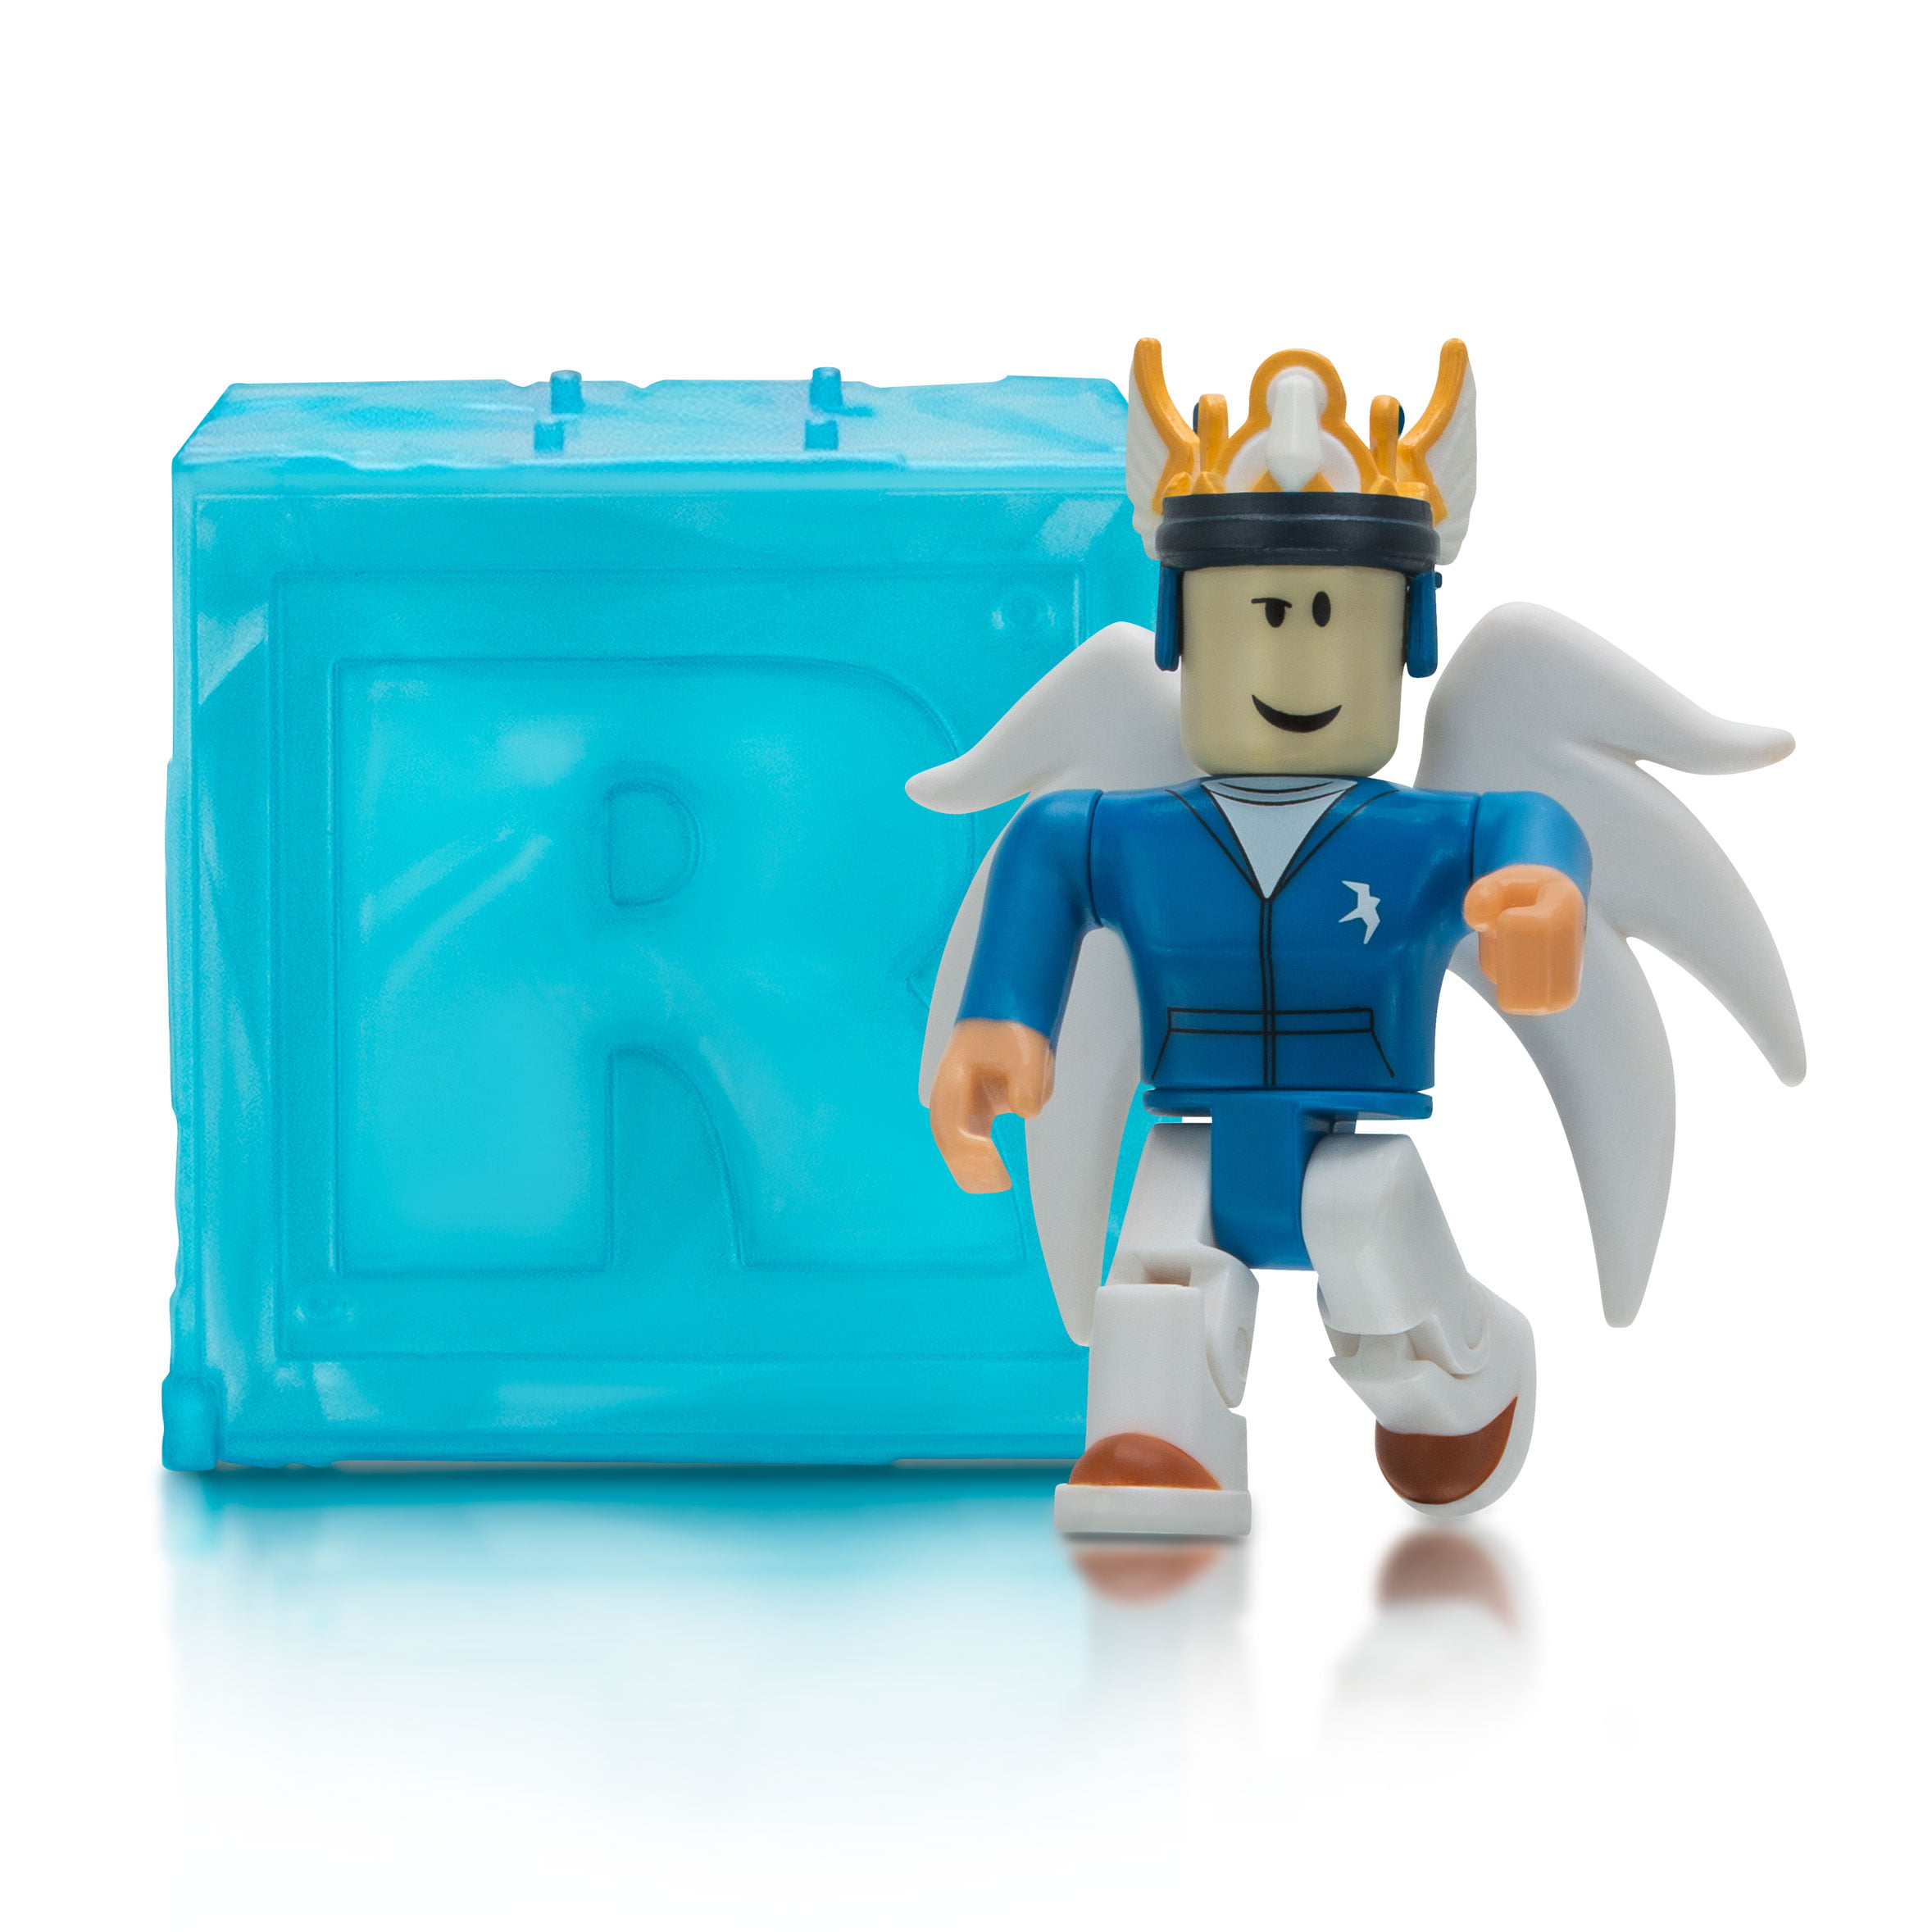 Roblox Action Collection Series 3 Mystery Figure Includes 1 Figure Exclusive Virtual Item Walmart Com Walmart Com - roblox mystery figures series 4 walmartcom